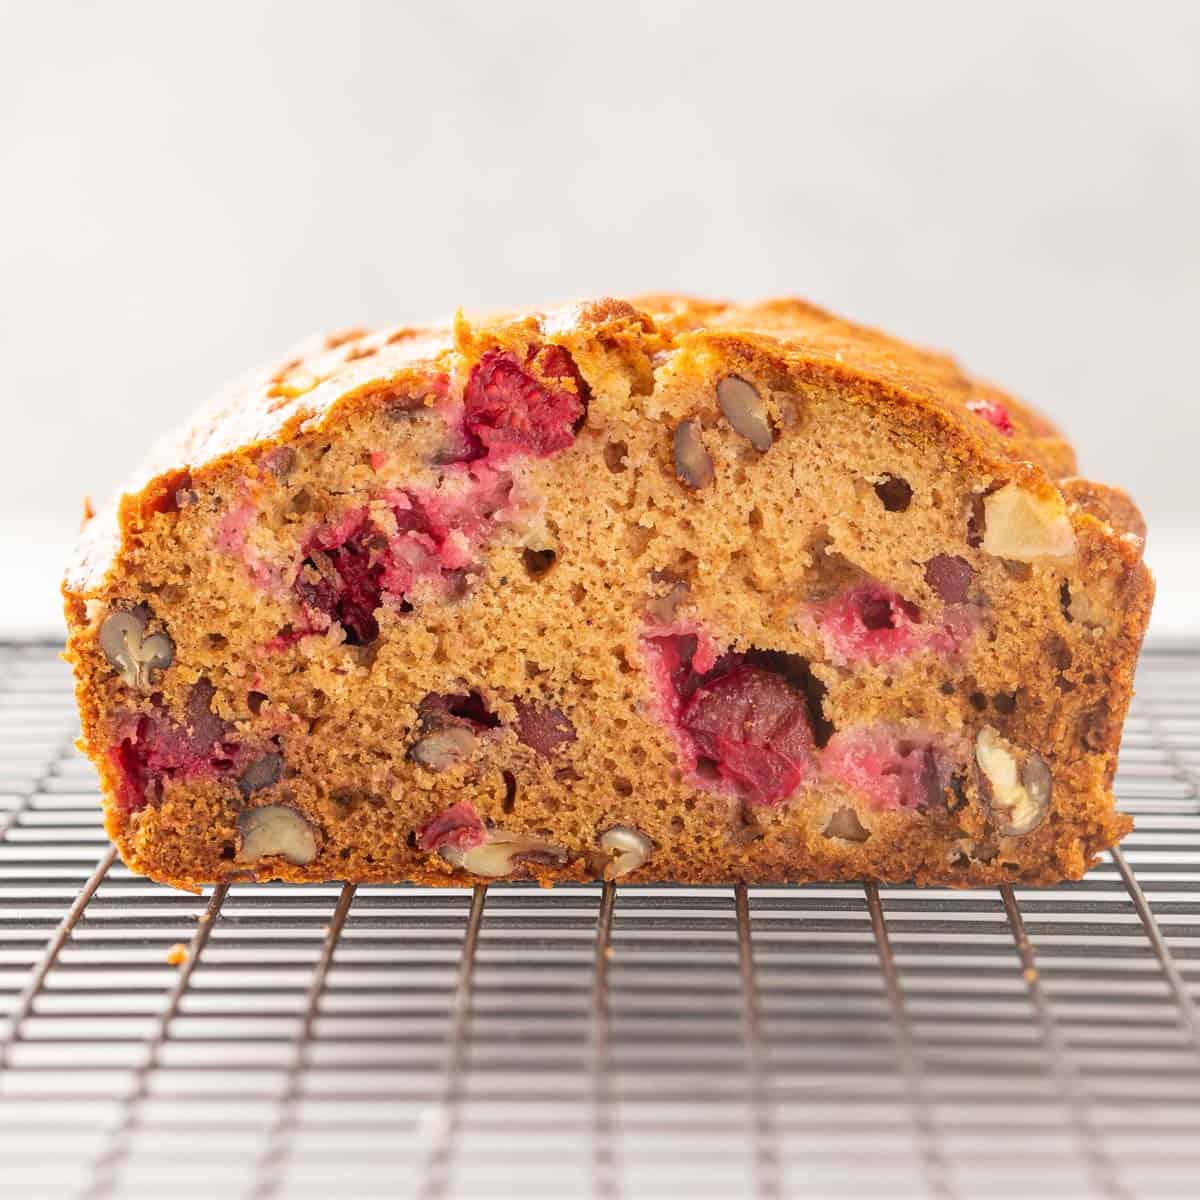 Front close up view of a sliced loaf of cranberry apple bread on a wire rack.